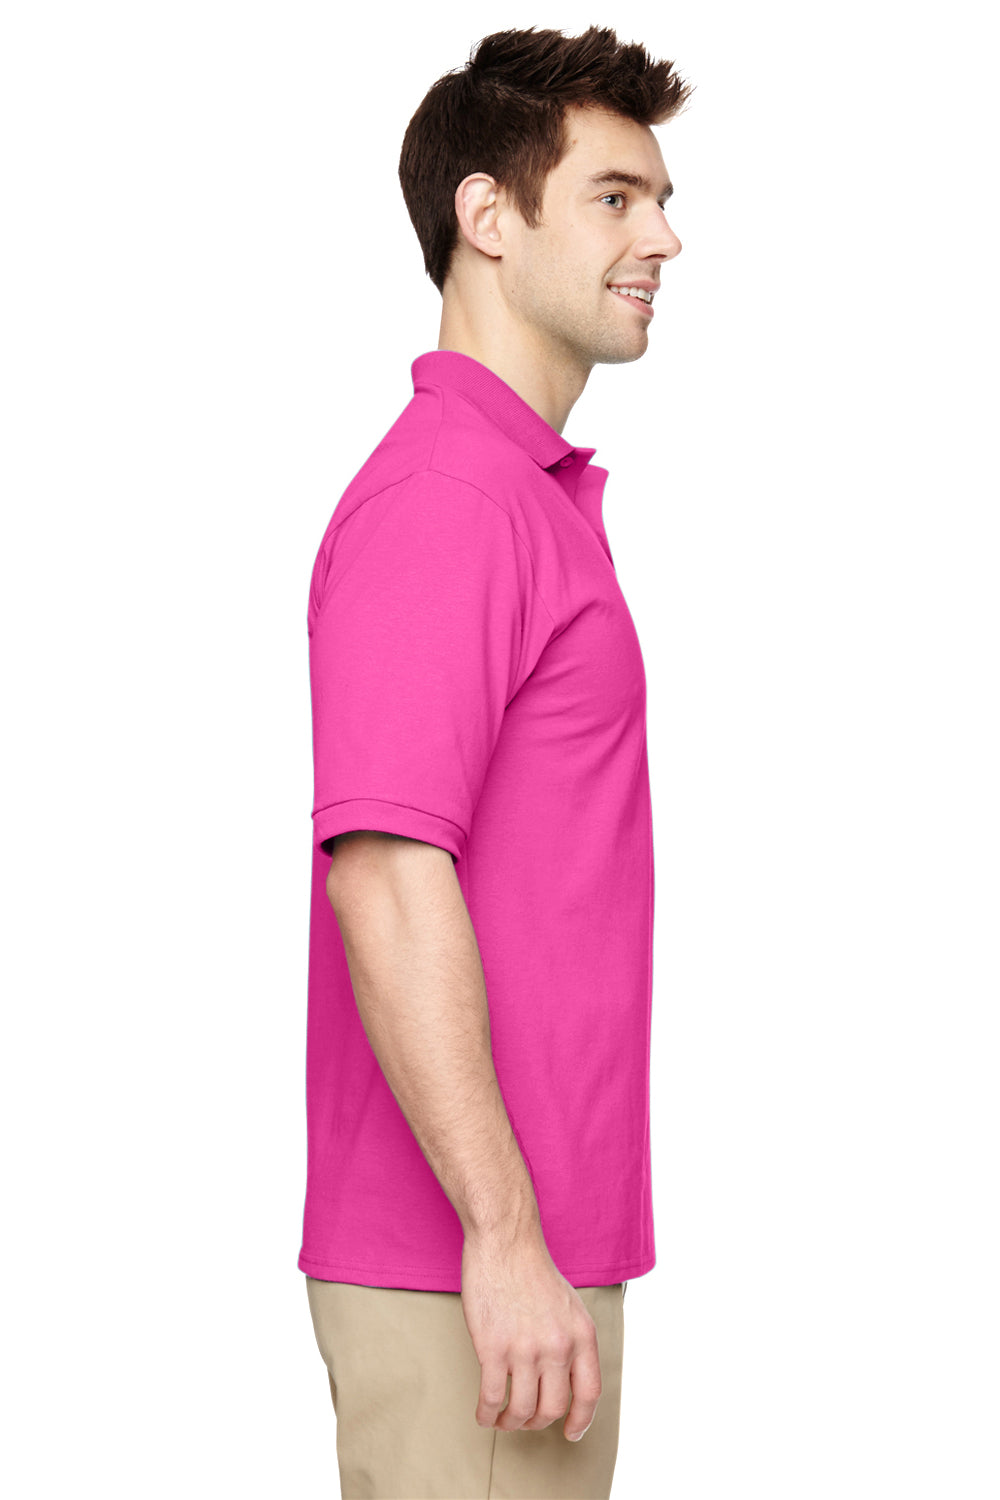 Jerzees 437 Mens SpotShield Stain Resistant Short Sleeve Polo Shirt Cyber Pink Side